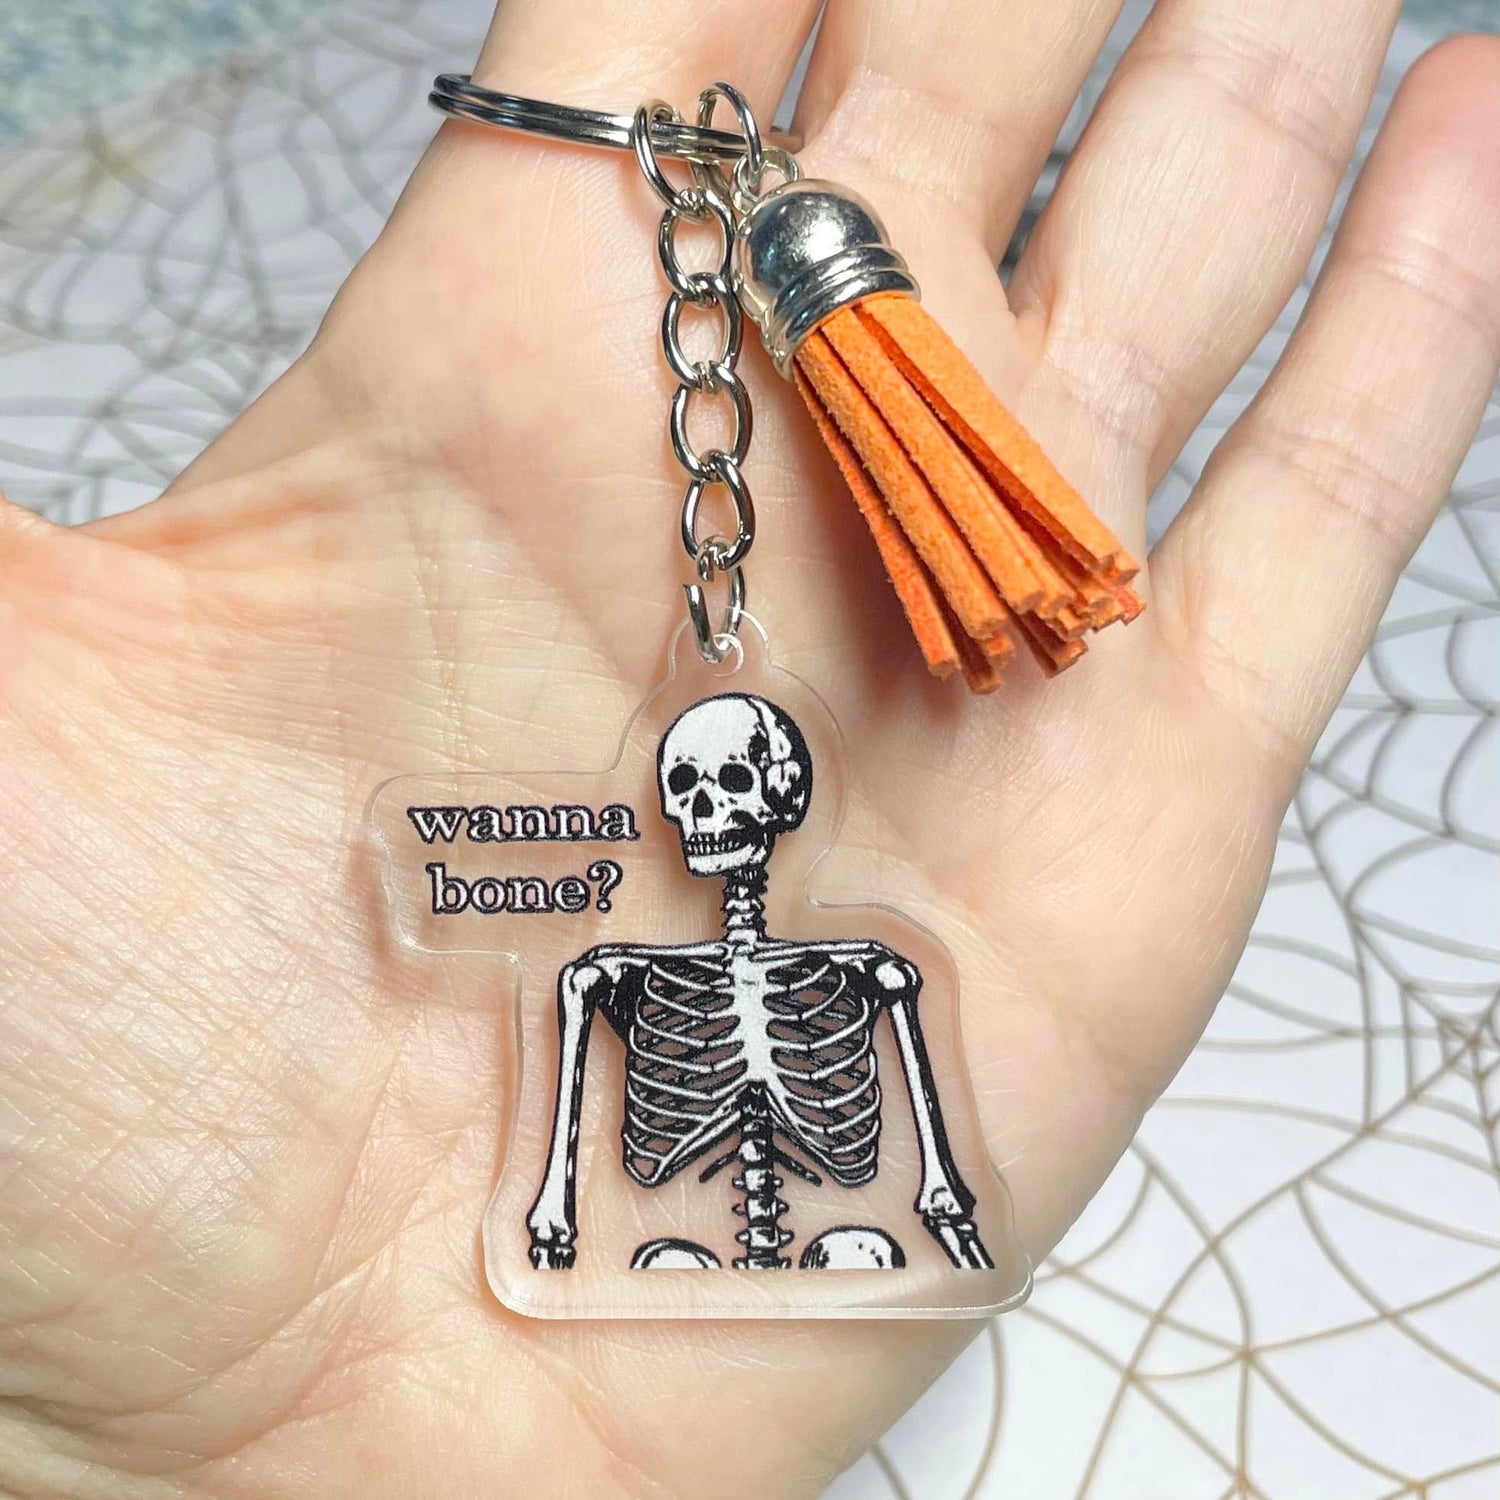 A photo of a halloween keychain. The keychain has a skeleton on it. Text on keychain reads 'Wanna Bone?'